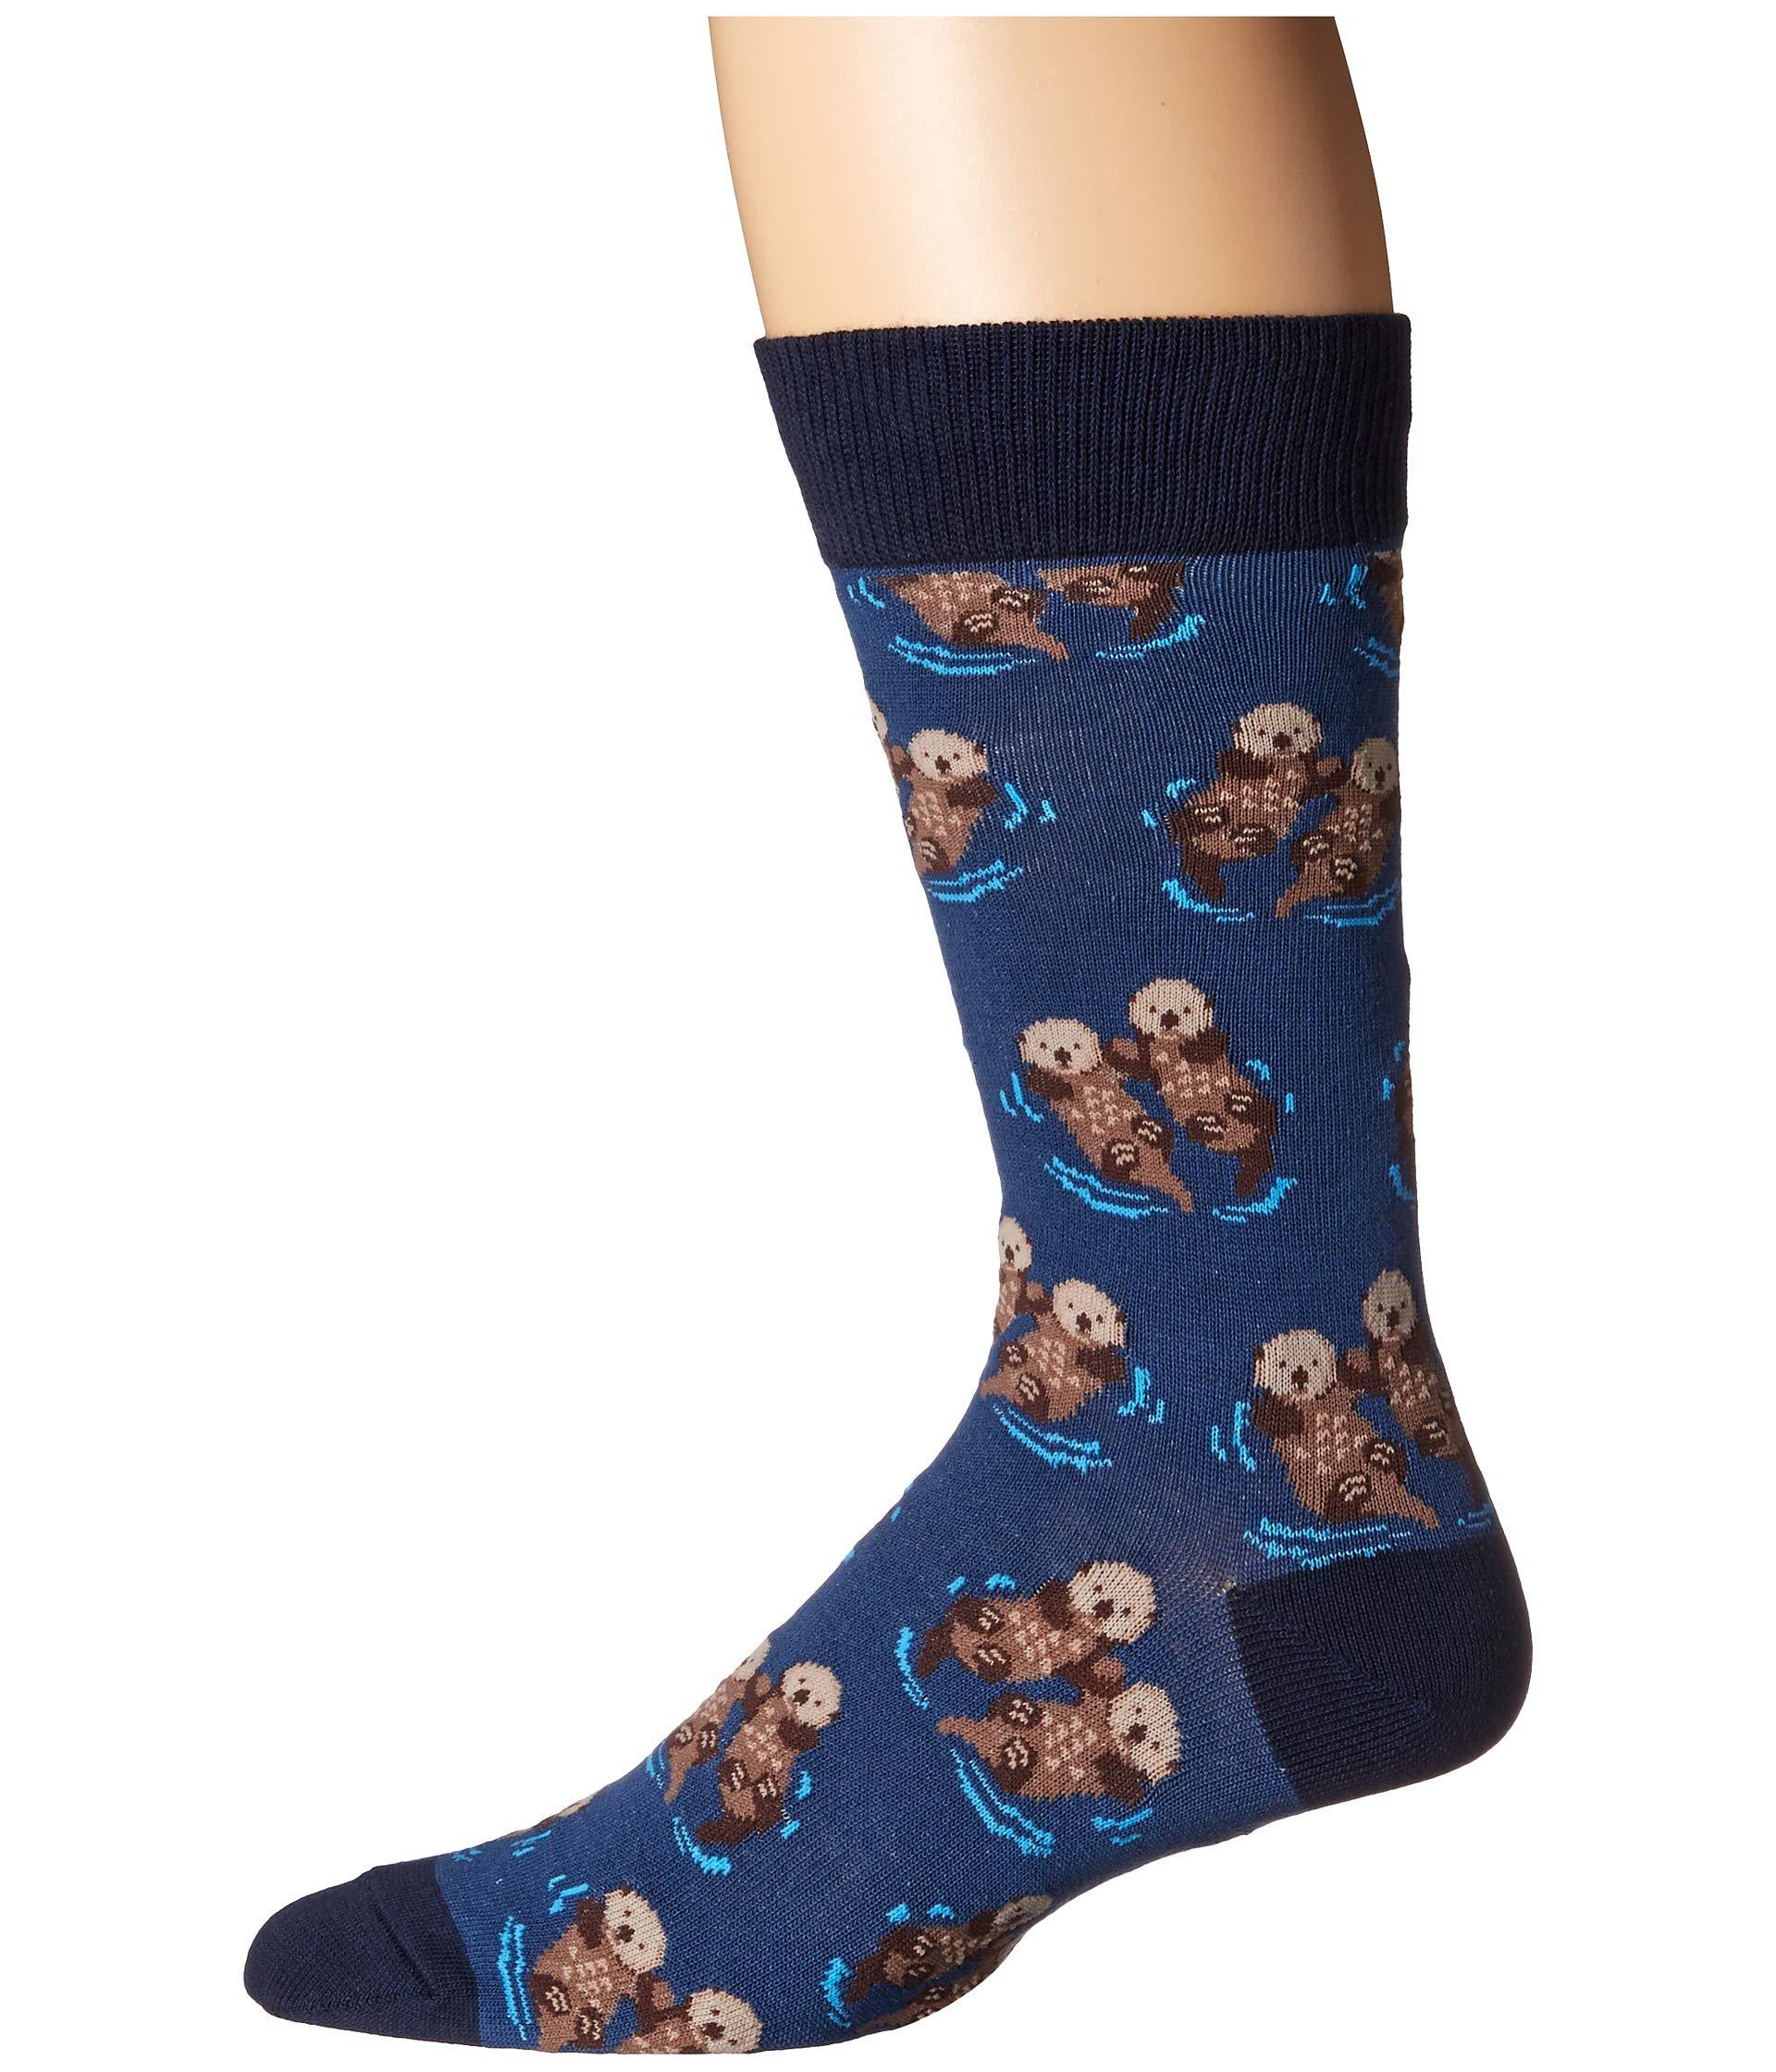 Lyst - Socksmith Significant Otter (blue) Men's Crew Cut Socks Shoes in ...